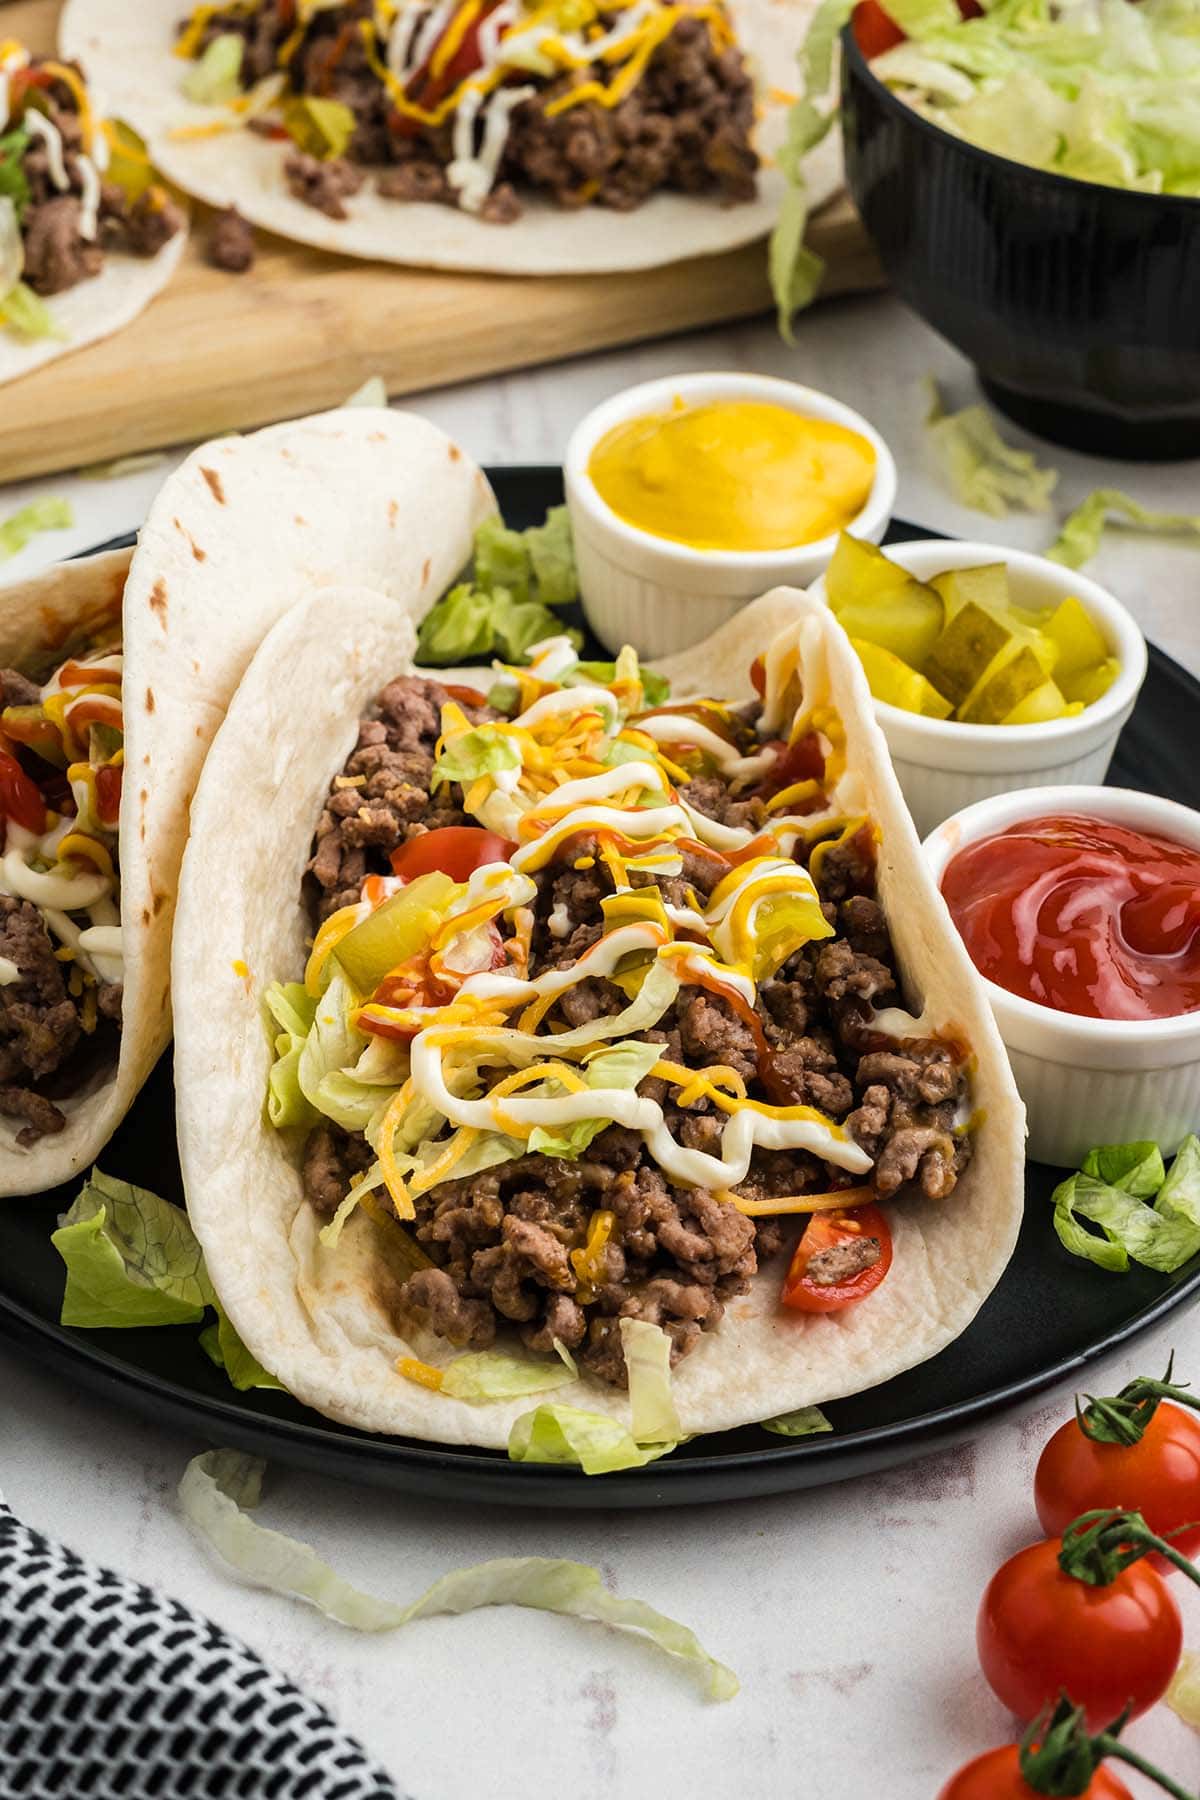 Cheeseburger Tacos drizzled with tomato sauce and mustard.